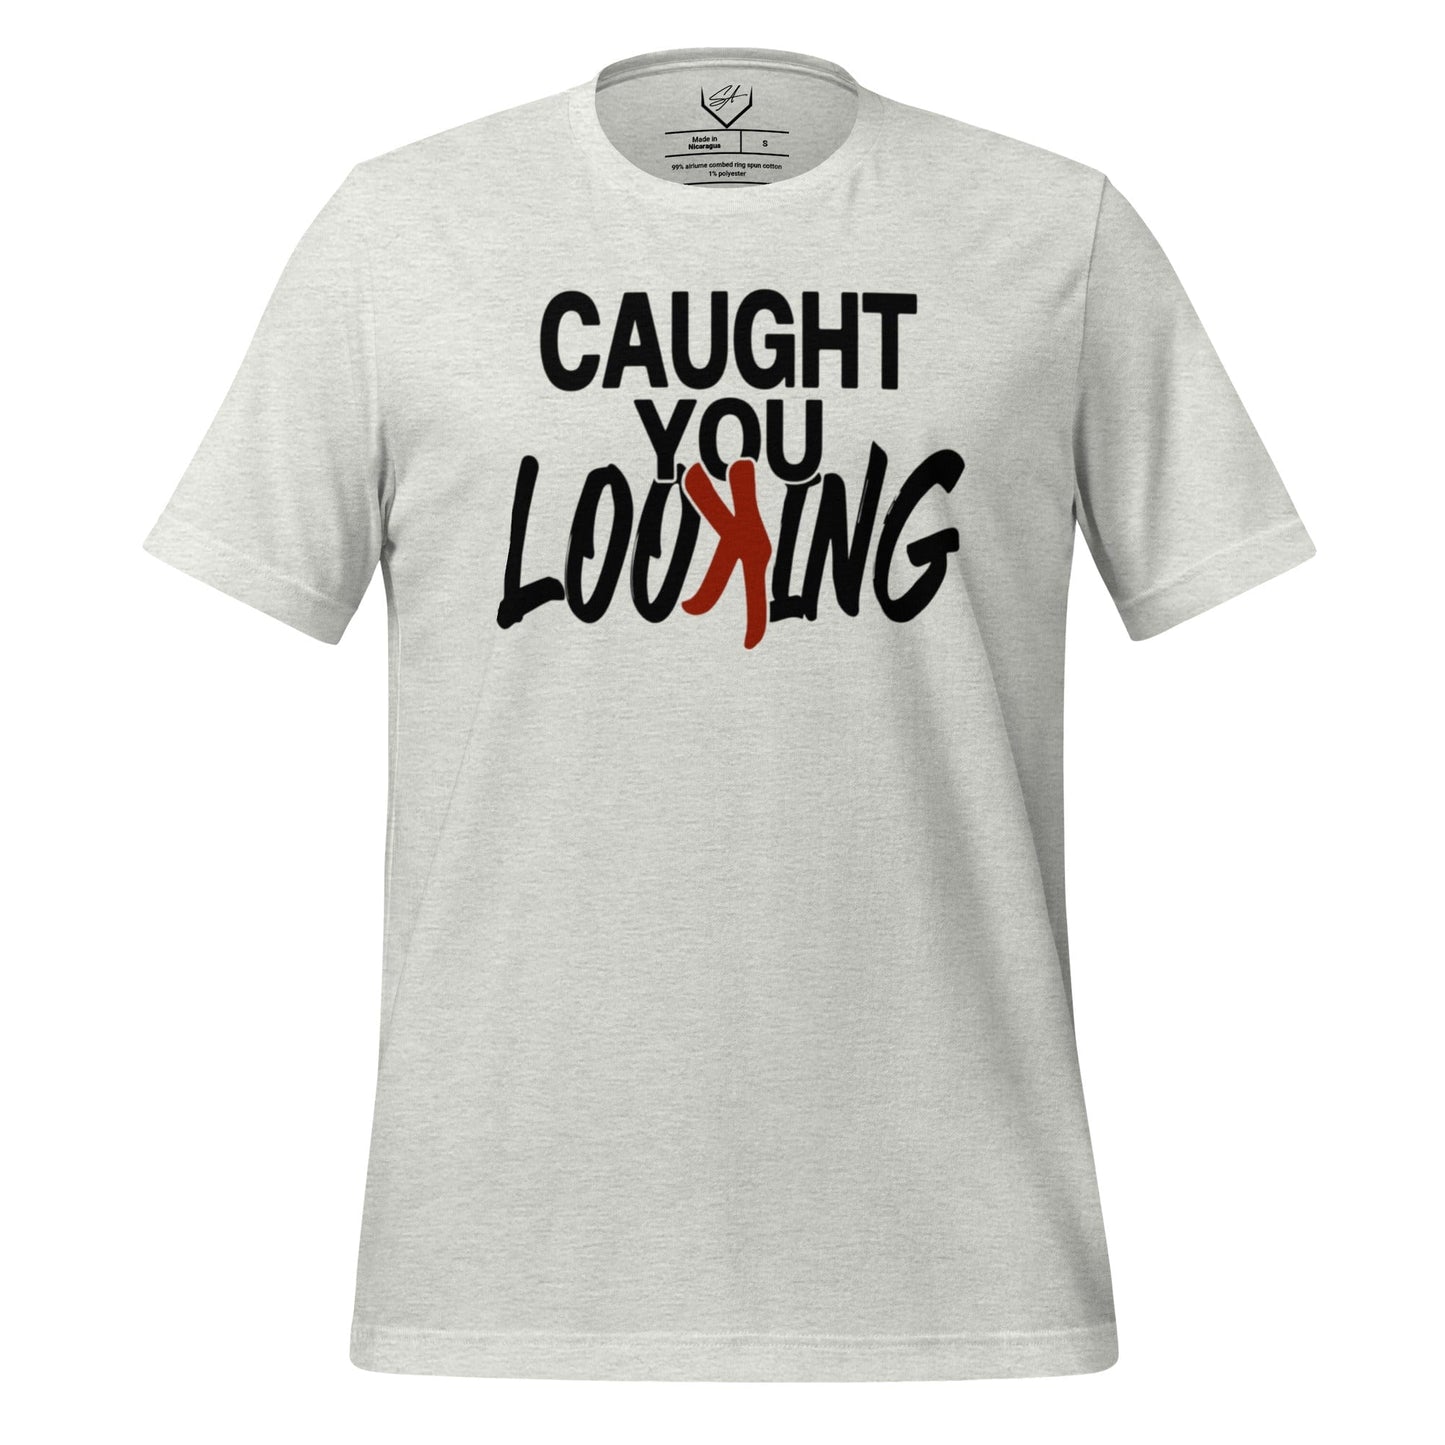 Caught You Looking - Adult Tee